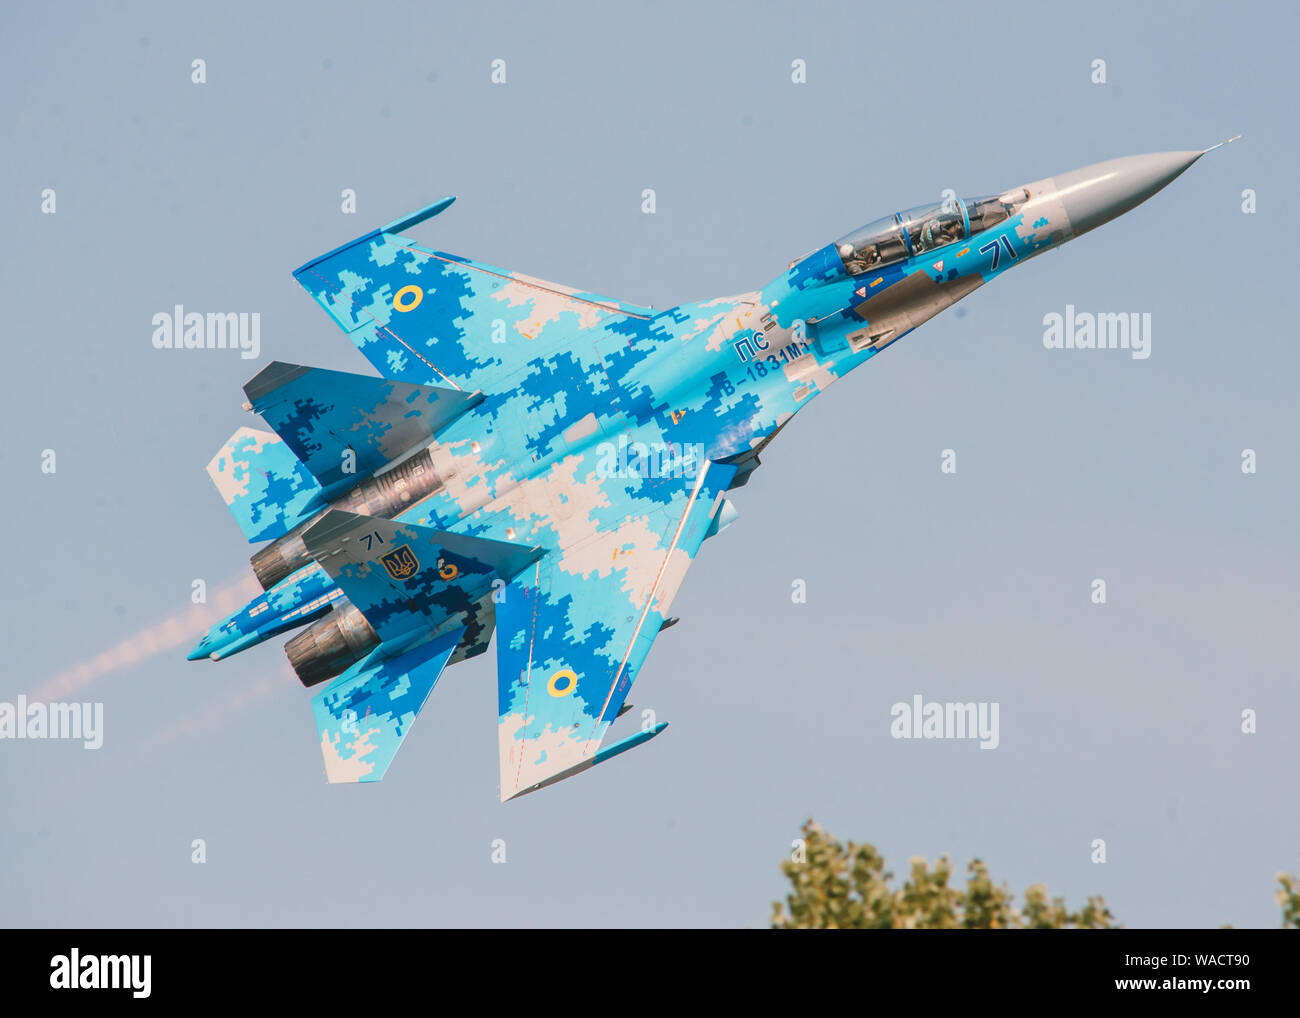 Ukrainian Air Force Sukhoi Su-27UB 'Flanker' Blue 71 from 831st Tactical Aviation Brigade performing an airshow routine in Radom, Poland. Stock Photo